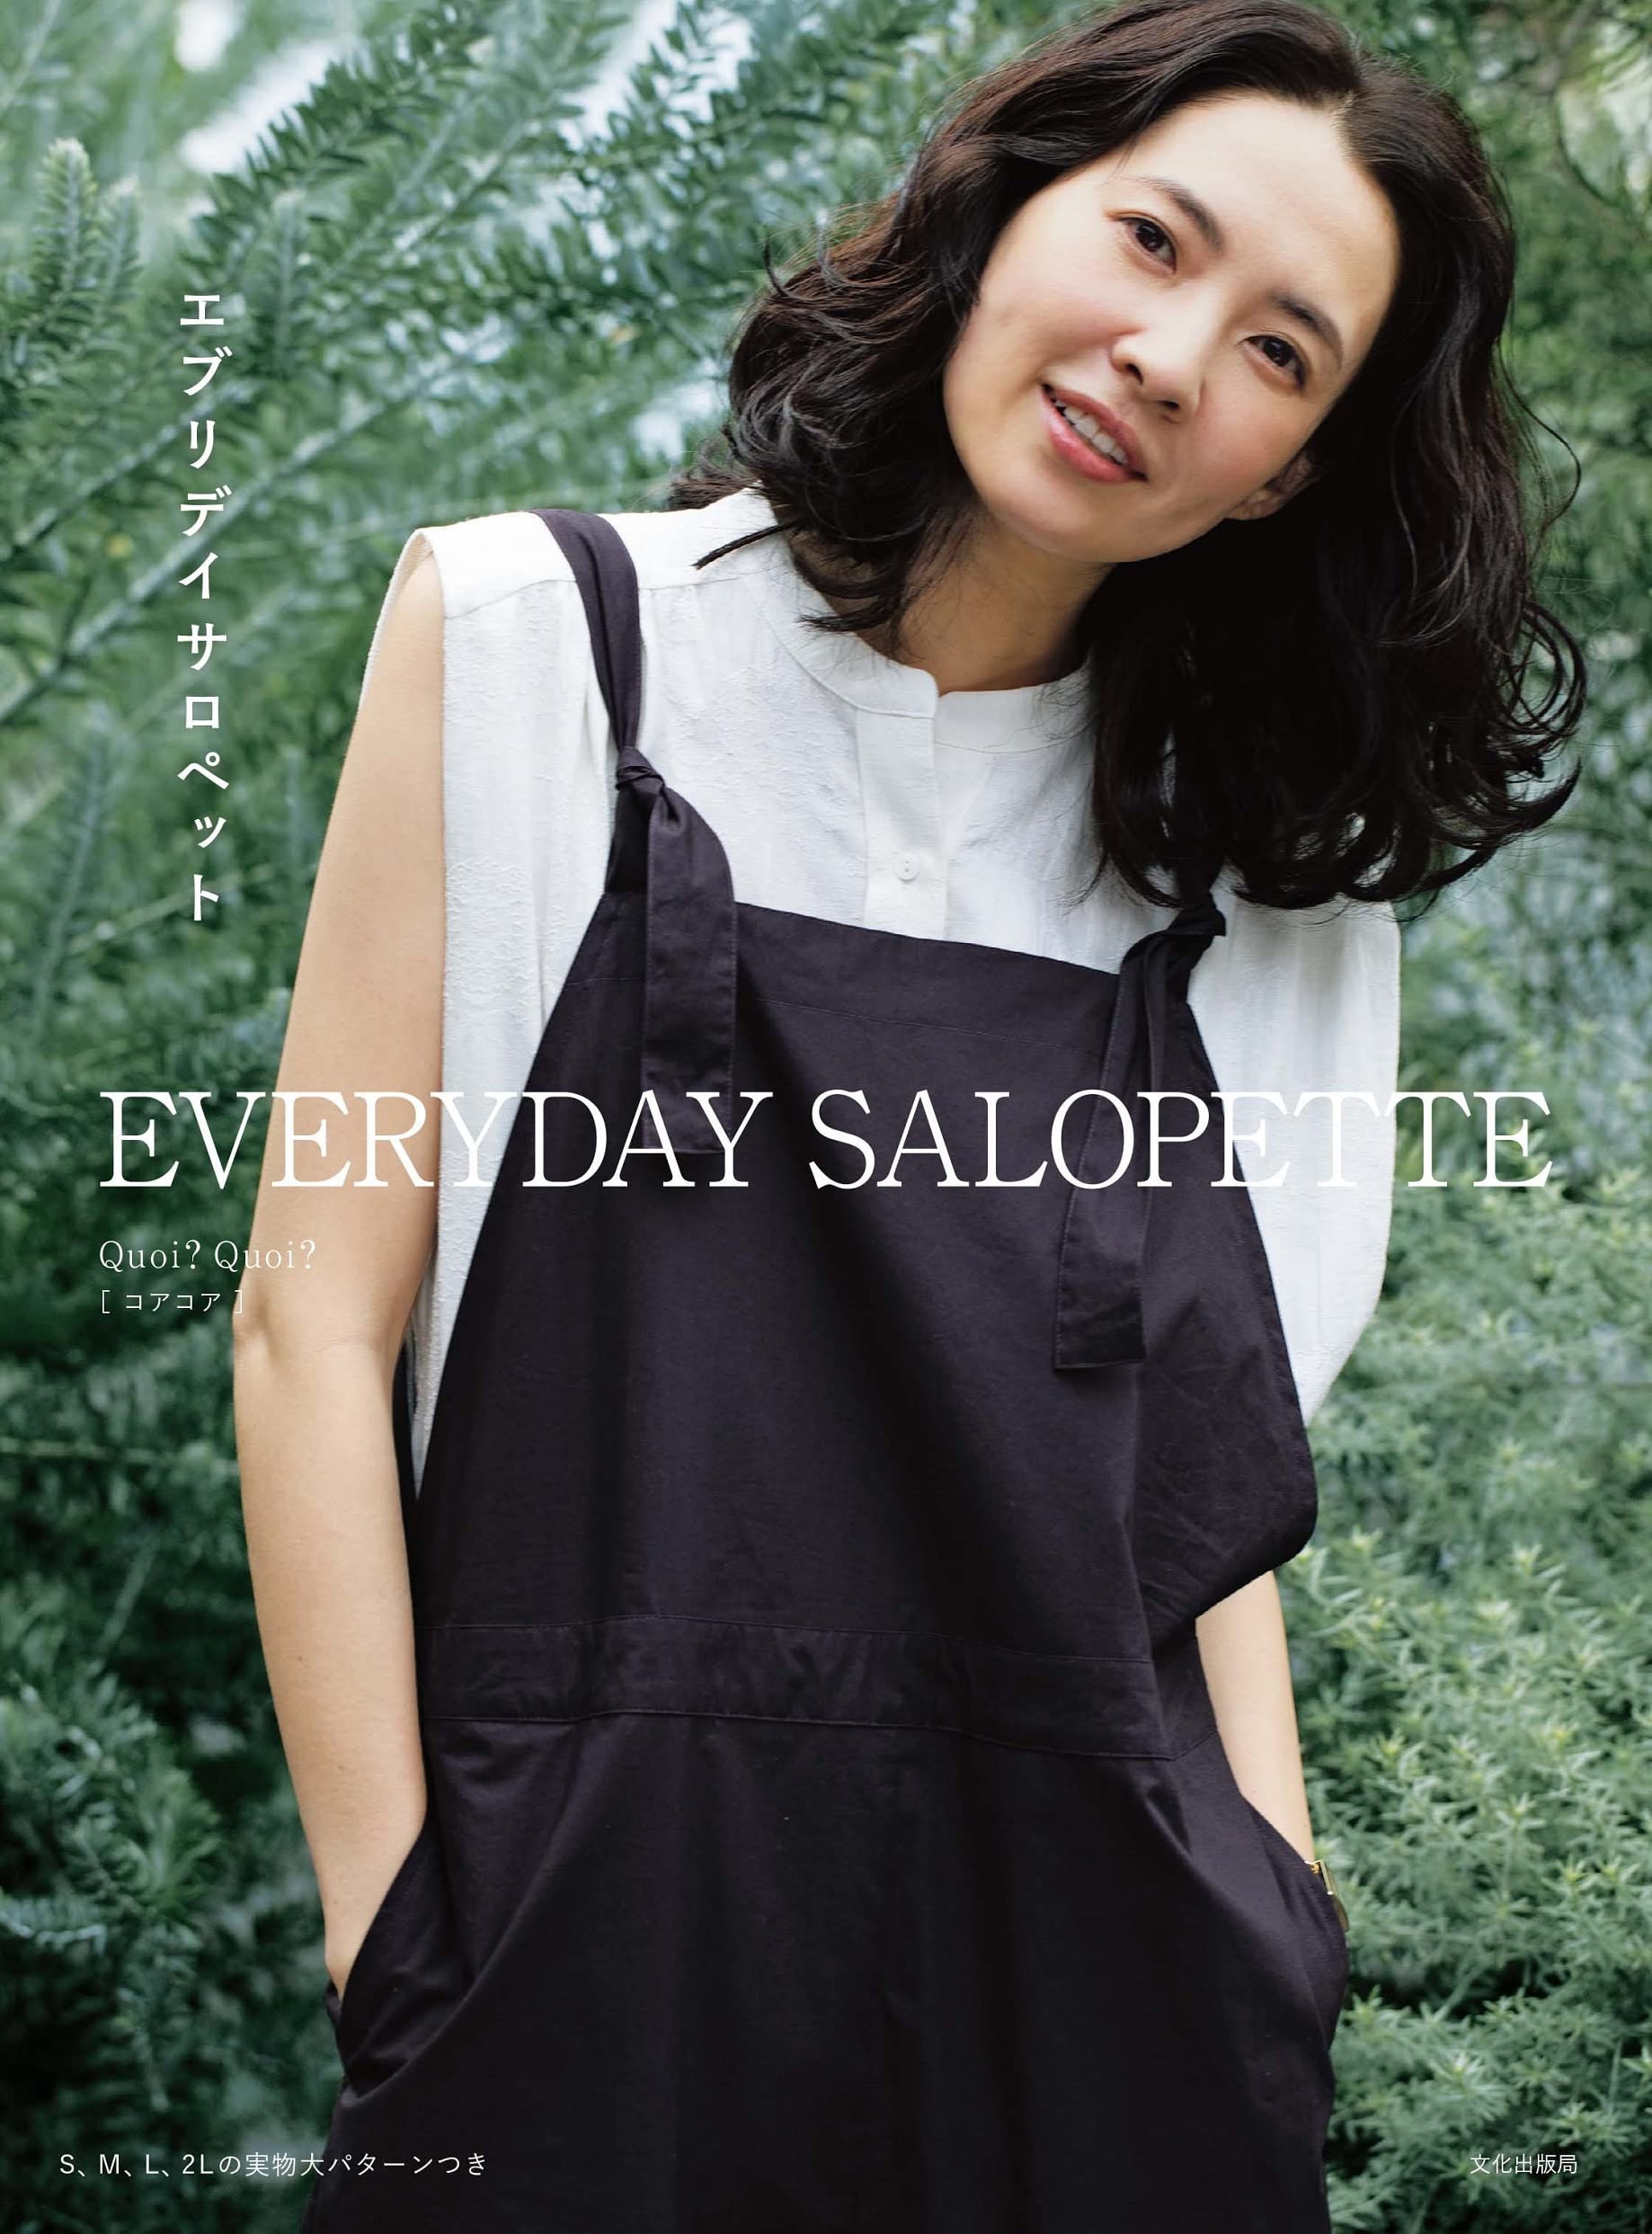 Everyday Salopette Overalls and Jumper Skirts Japanese Craft